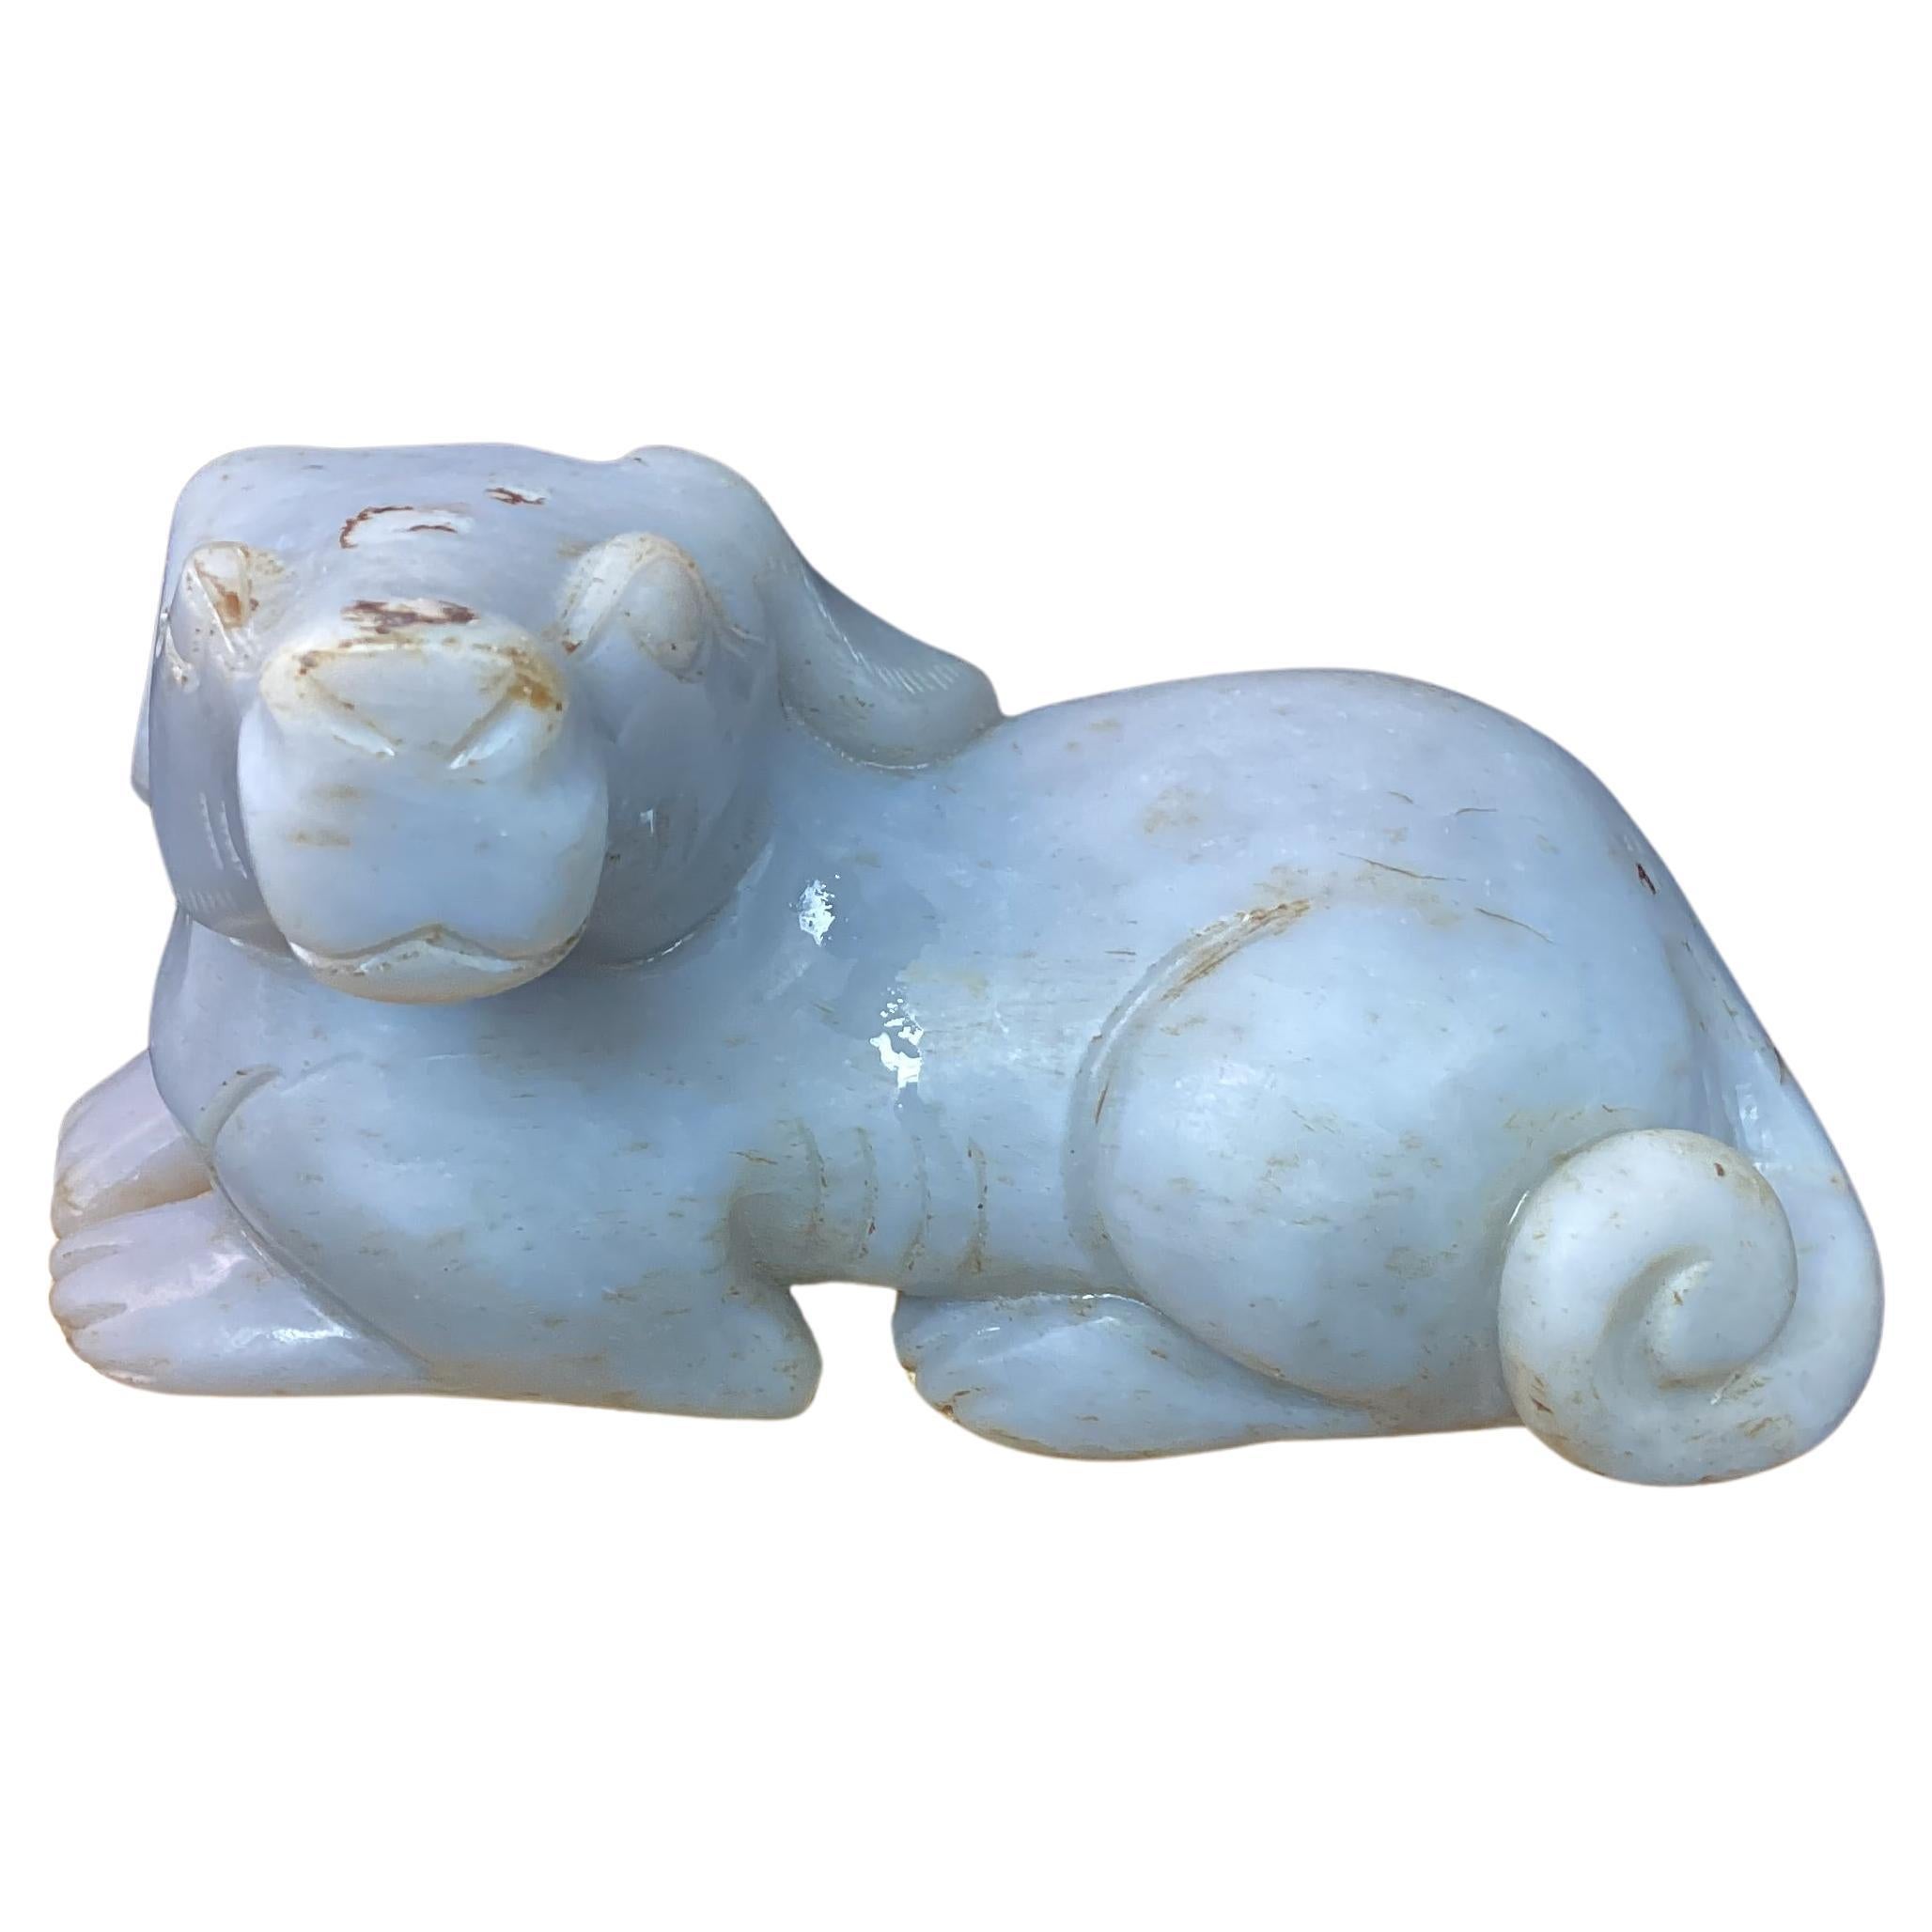 19th century figure of gray Chinese jade dog. Dog is lying down with tail curled around his body. Very intricately carved.